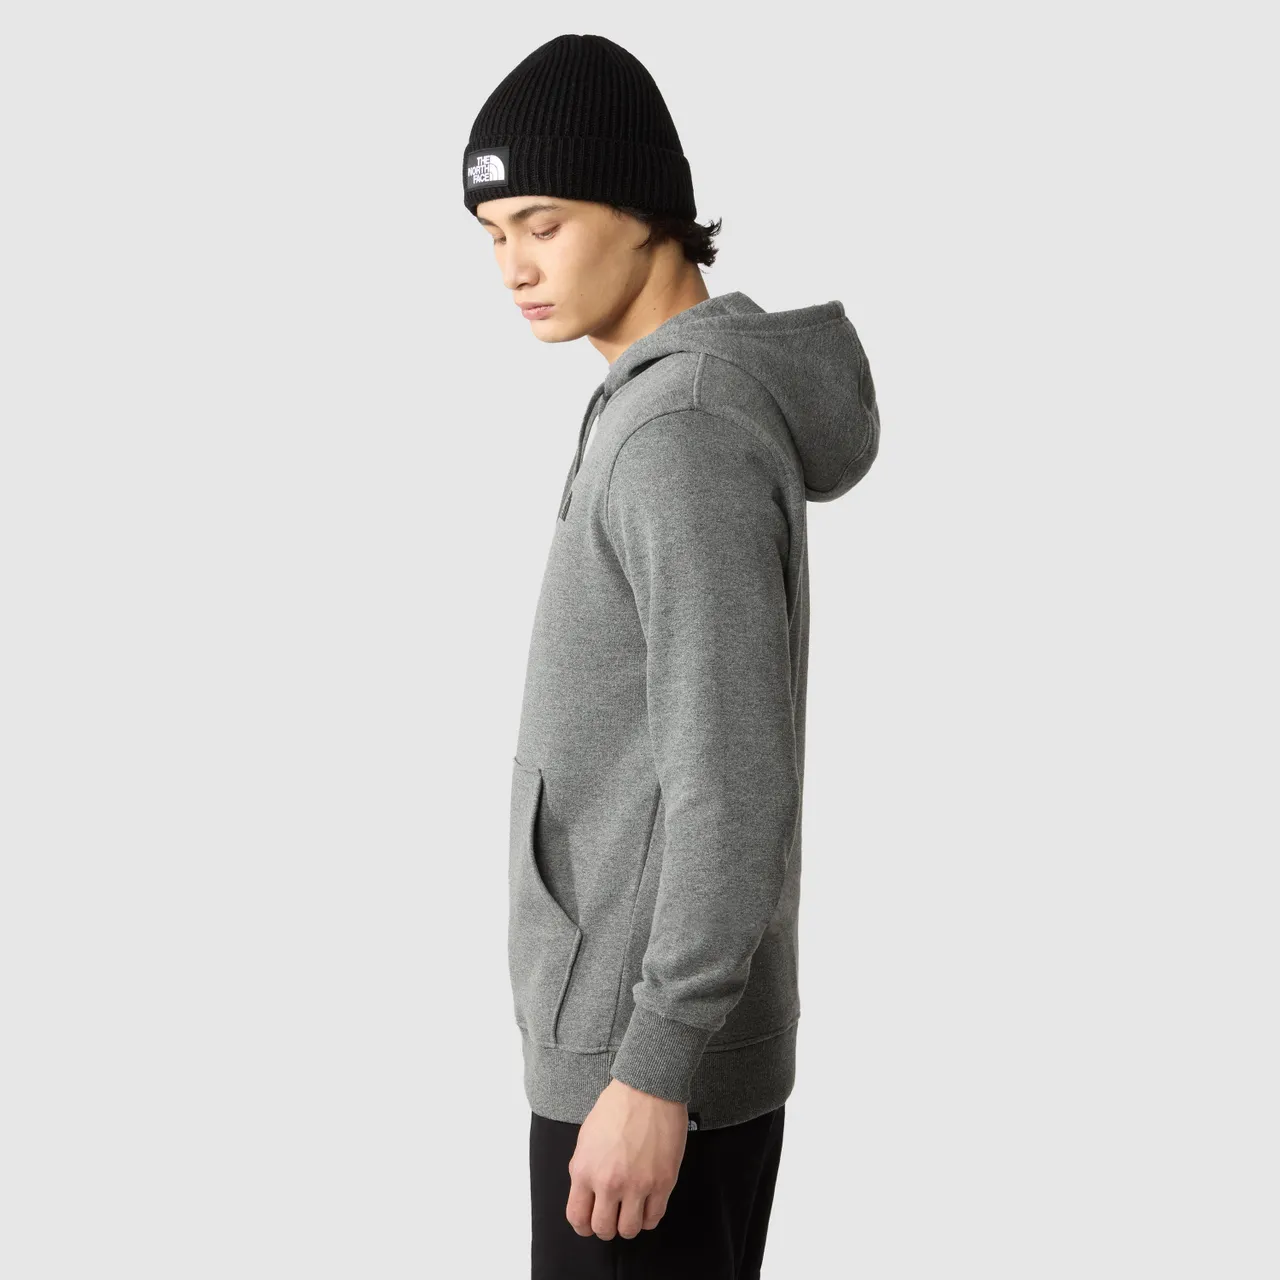 The North Face Simple Dome Hoodie Herren